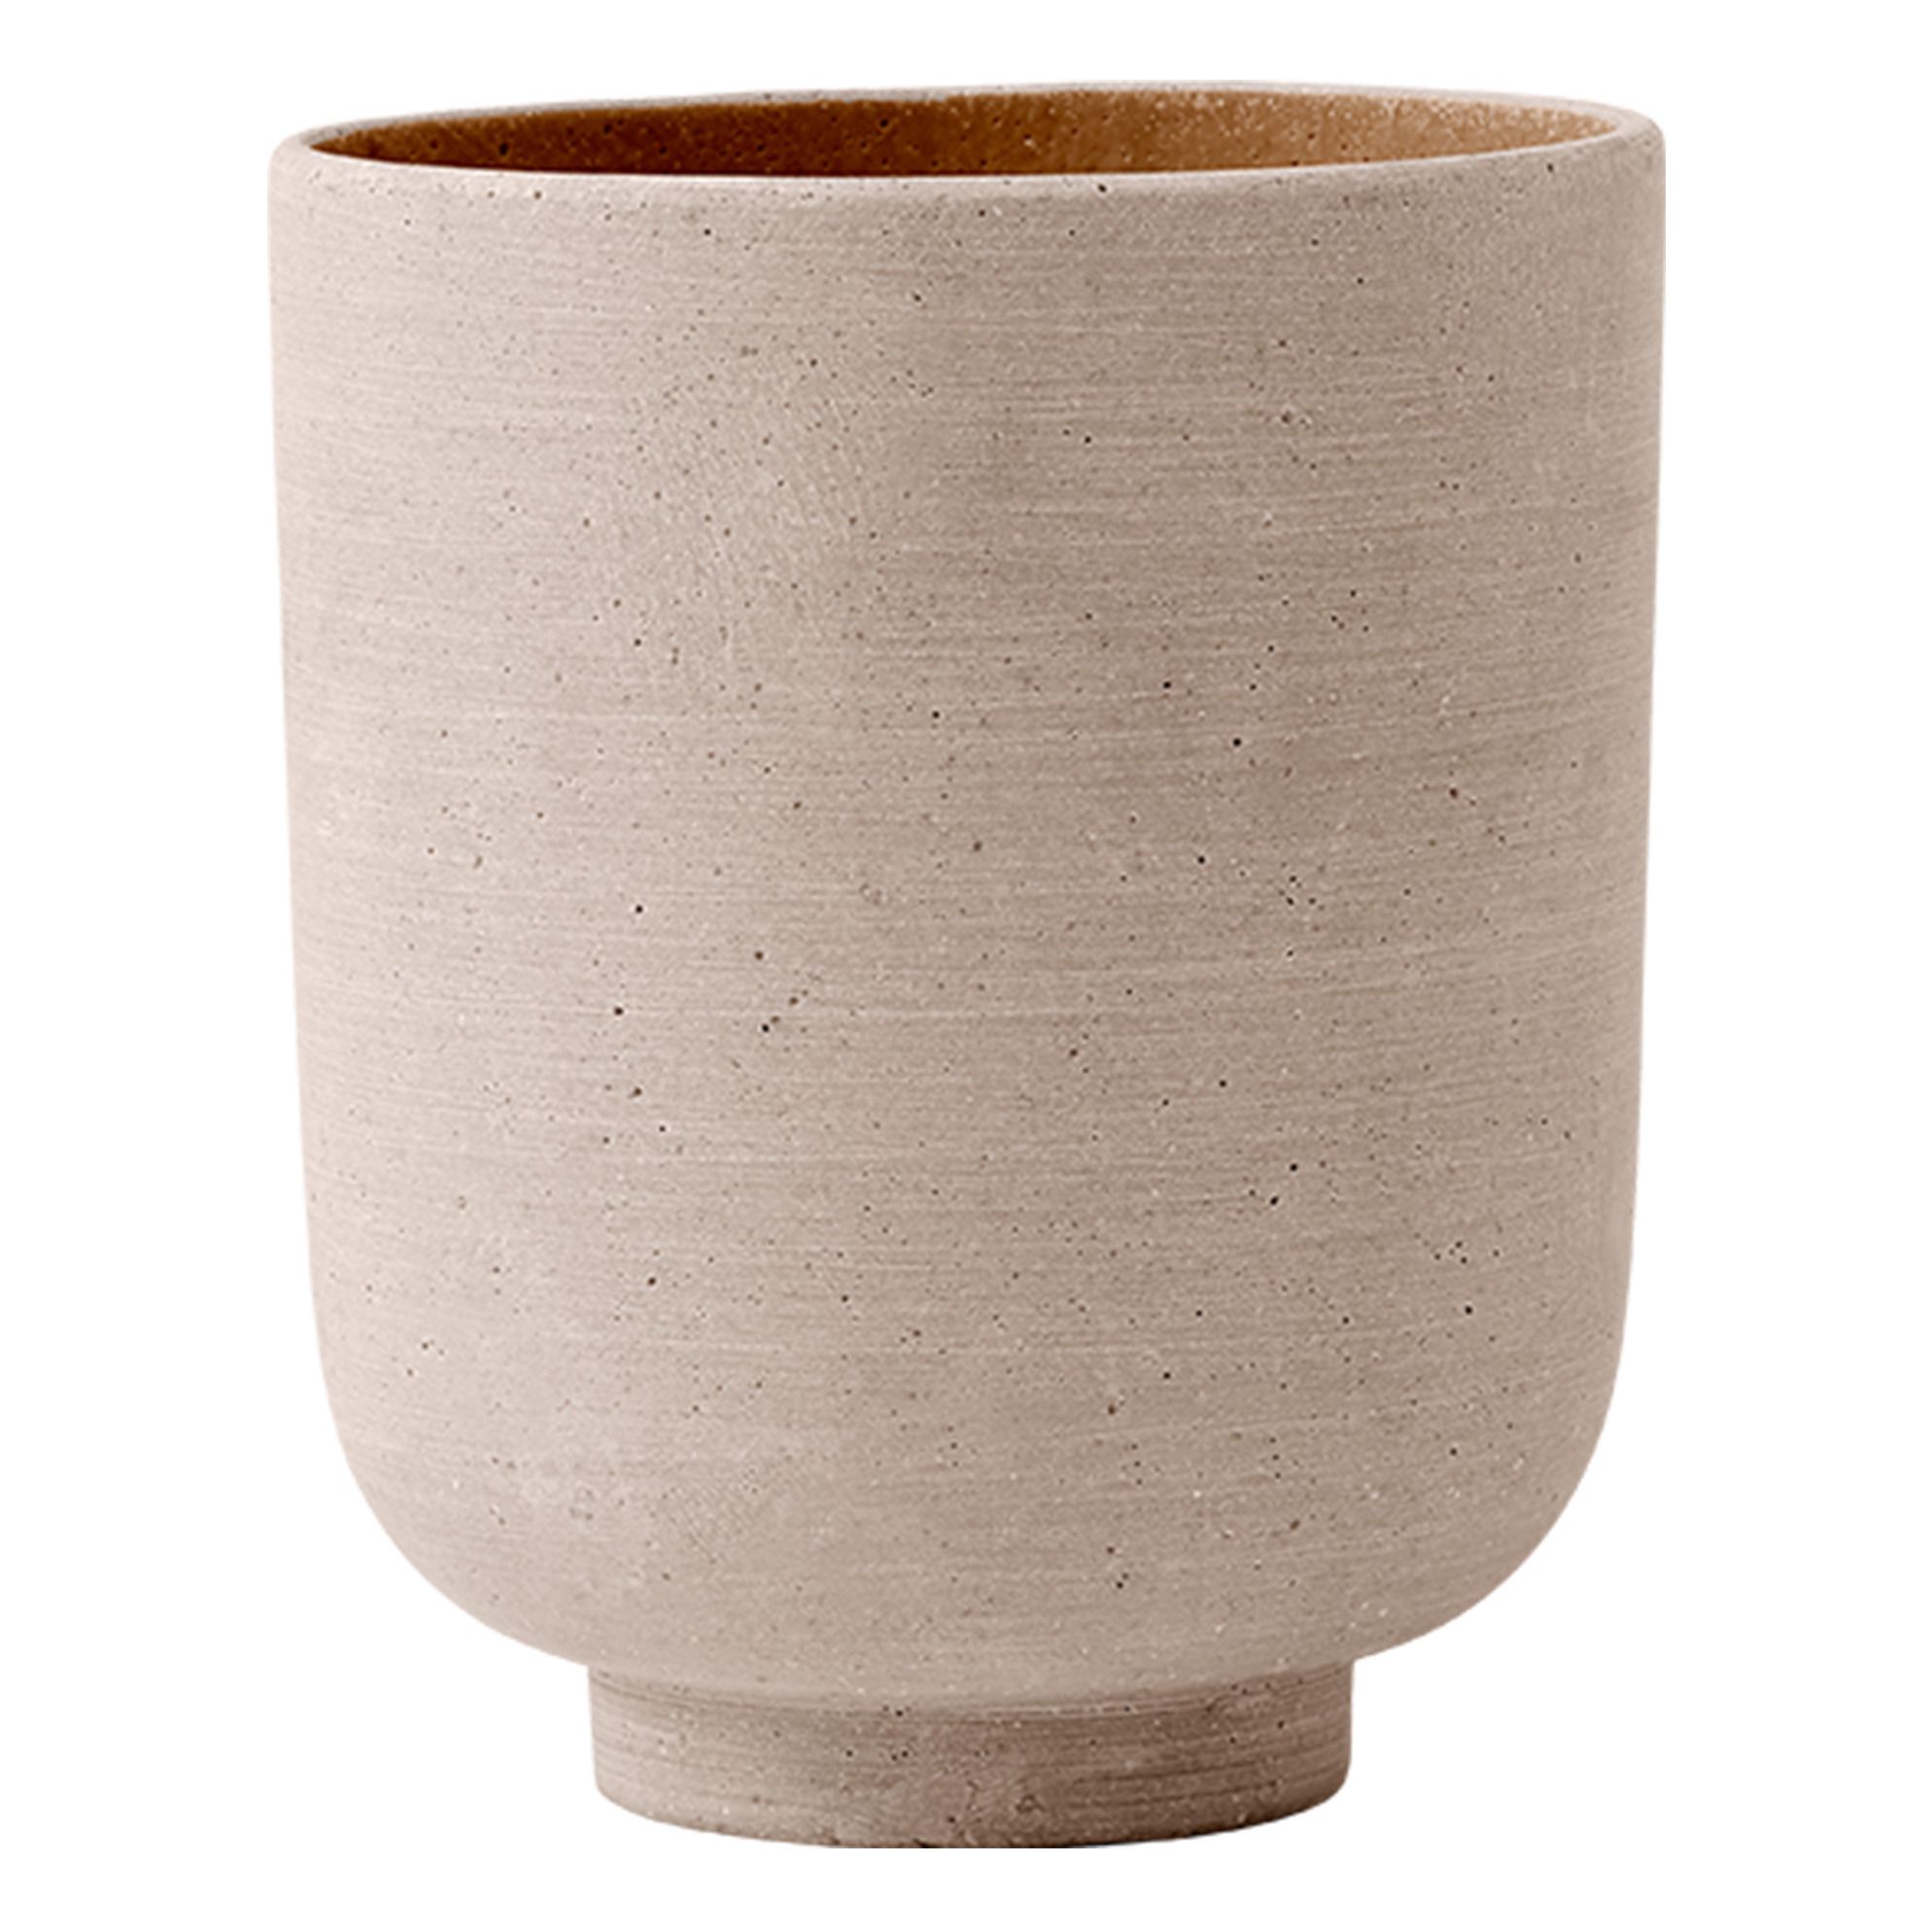 & Tradition - Pot Collect - Ocre